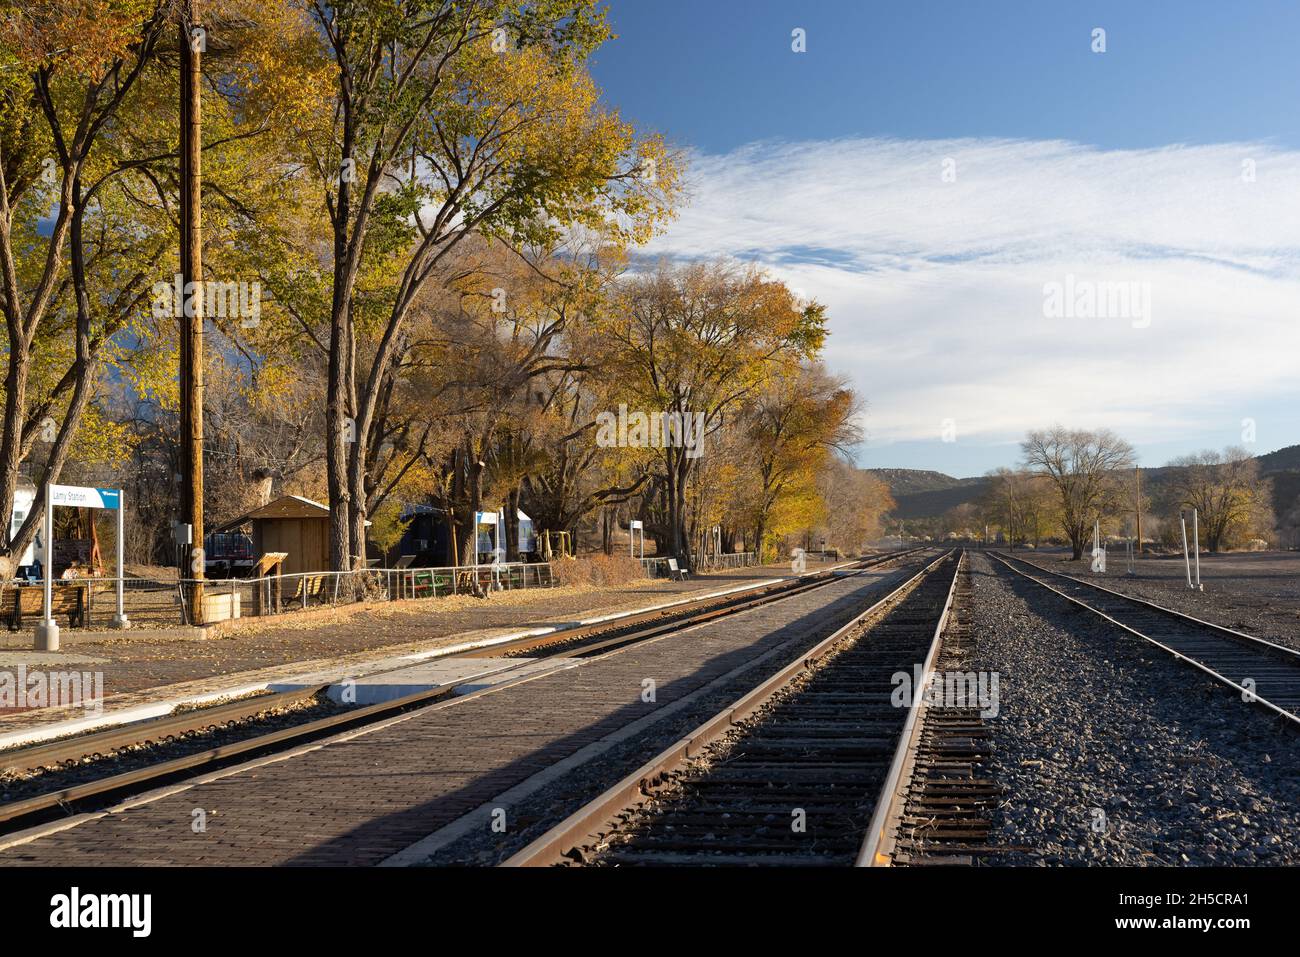 Railroad Station, Lamy, New Mexico. At this railroad station, Manhattan Project scientists and family arrived on their way to Los Alamos Stock Photo